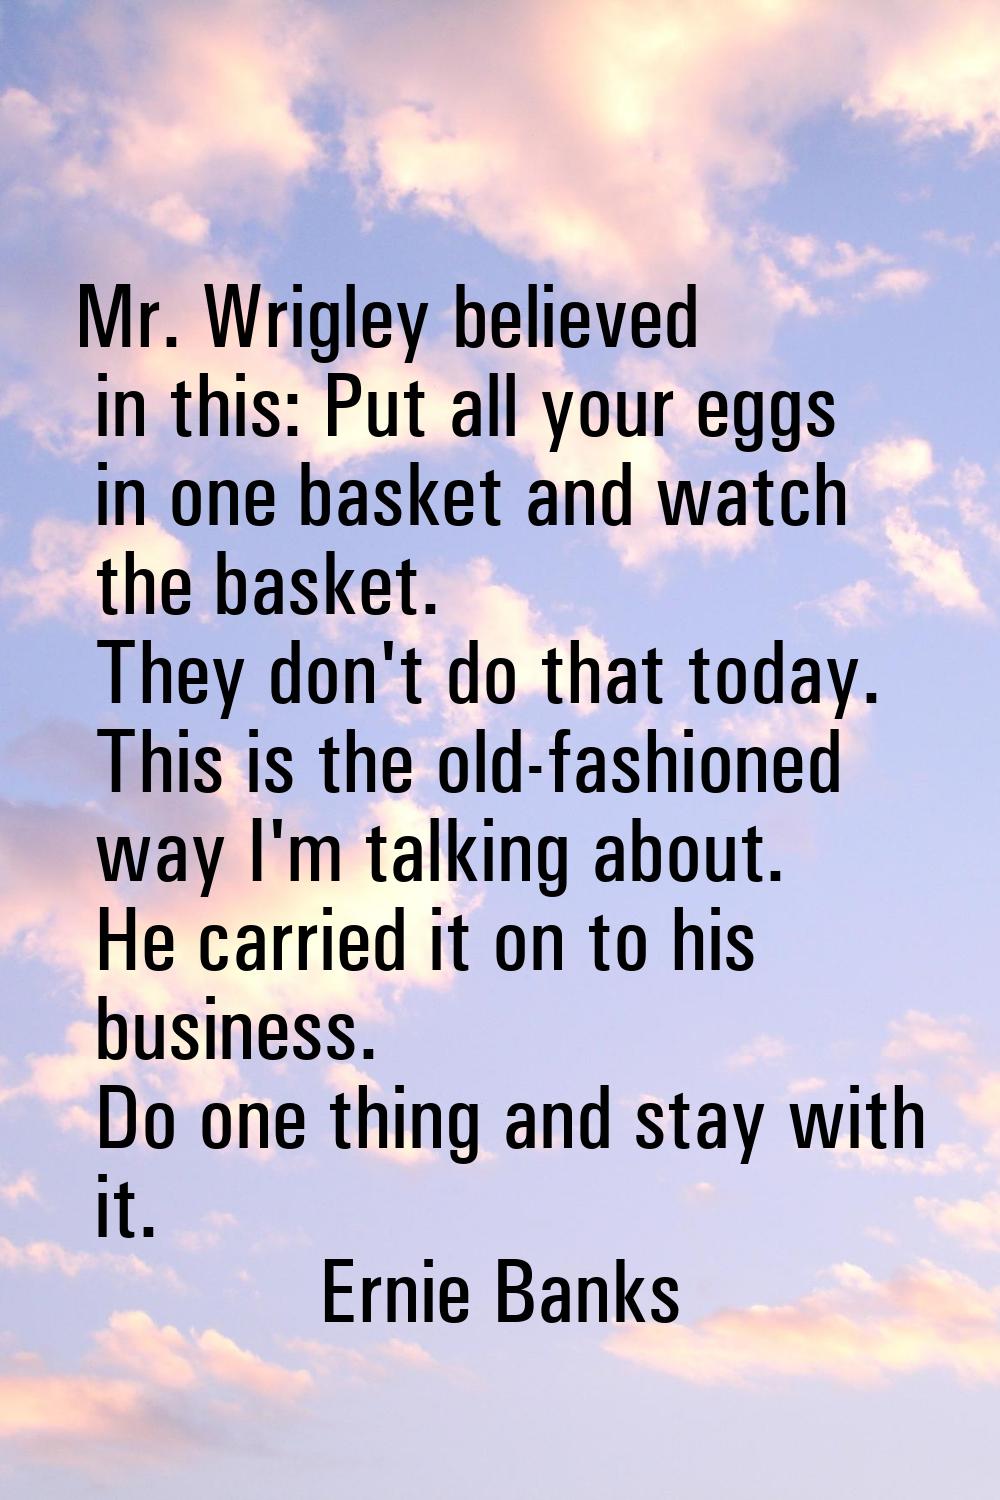 Mr. Wrigley believed in this: Put all your eggs in one basket and watch the basket. They don't do t